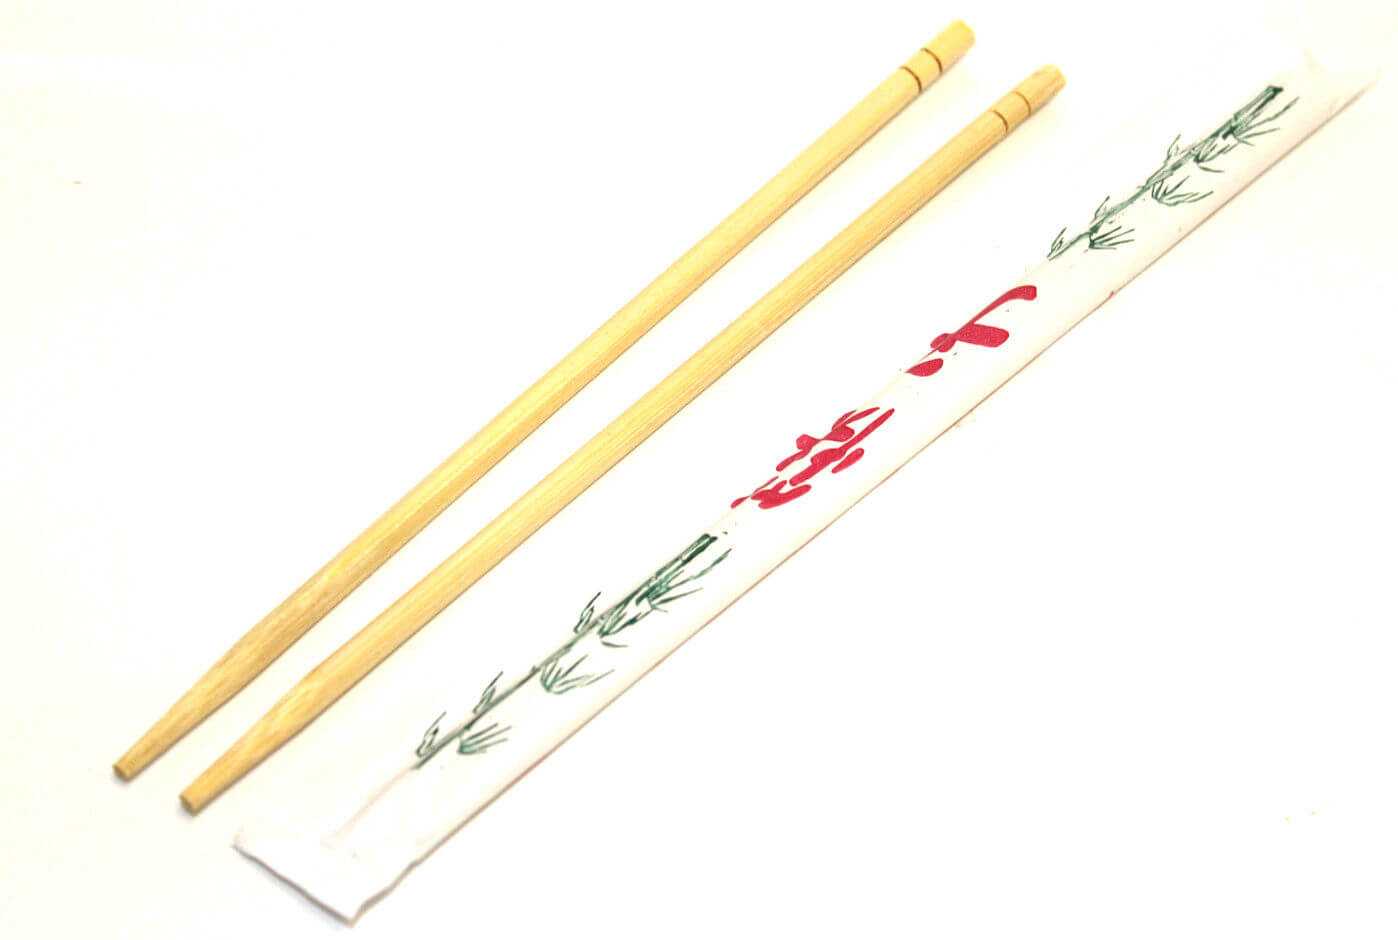 Disposable Bamboo Chopsticks - Commonly used in China